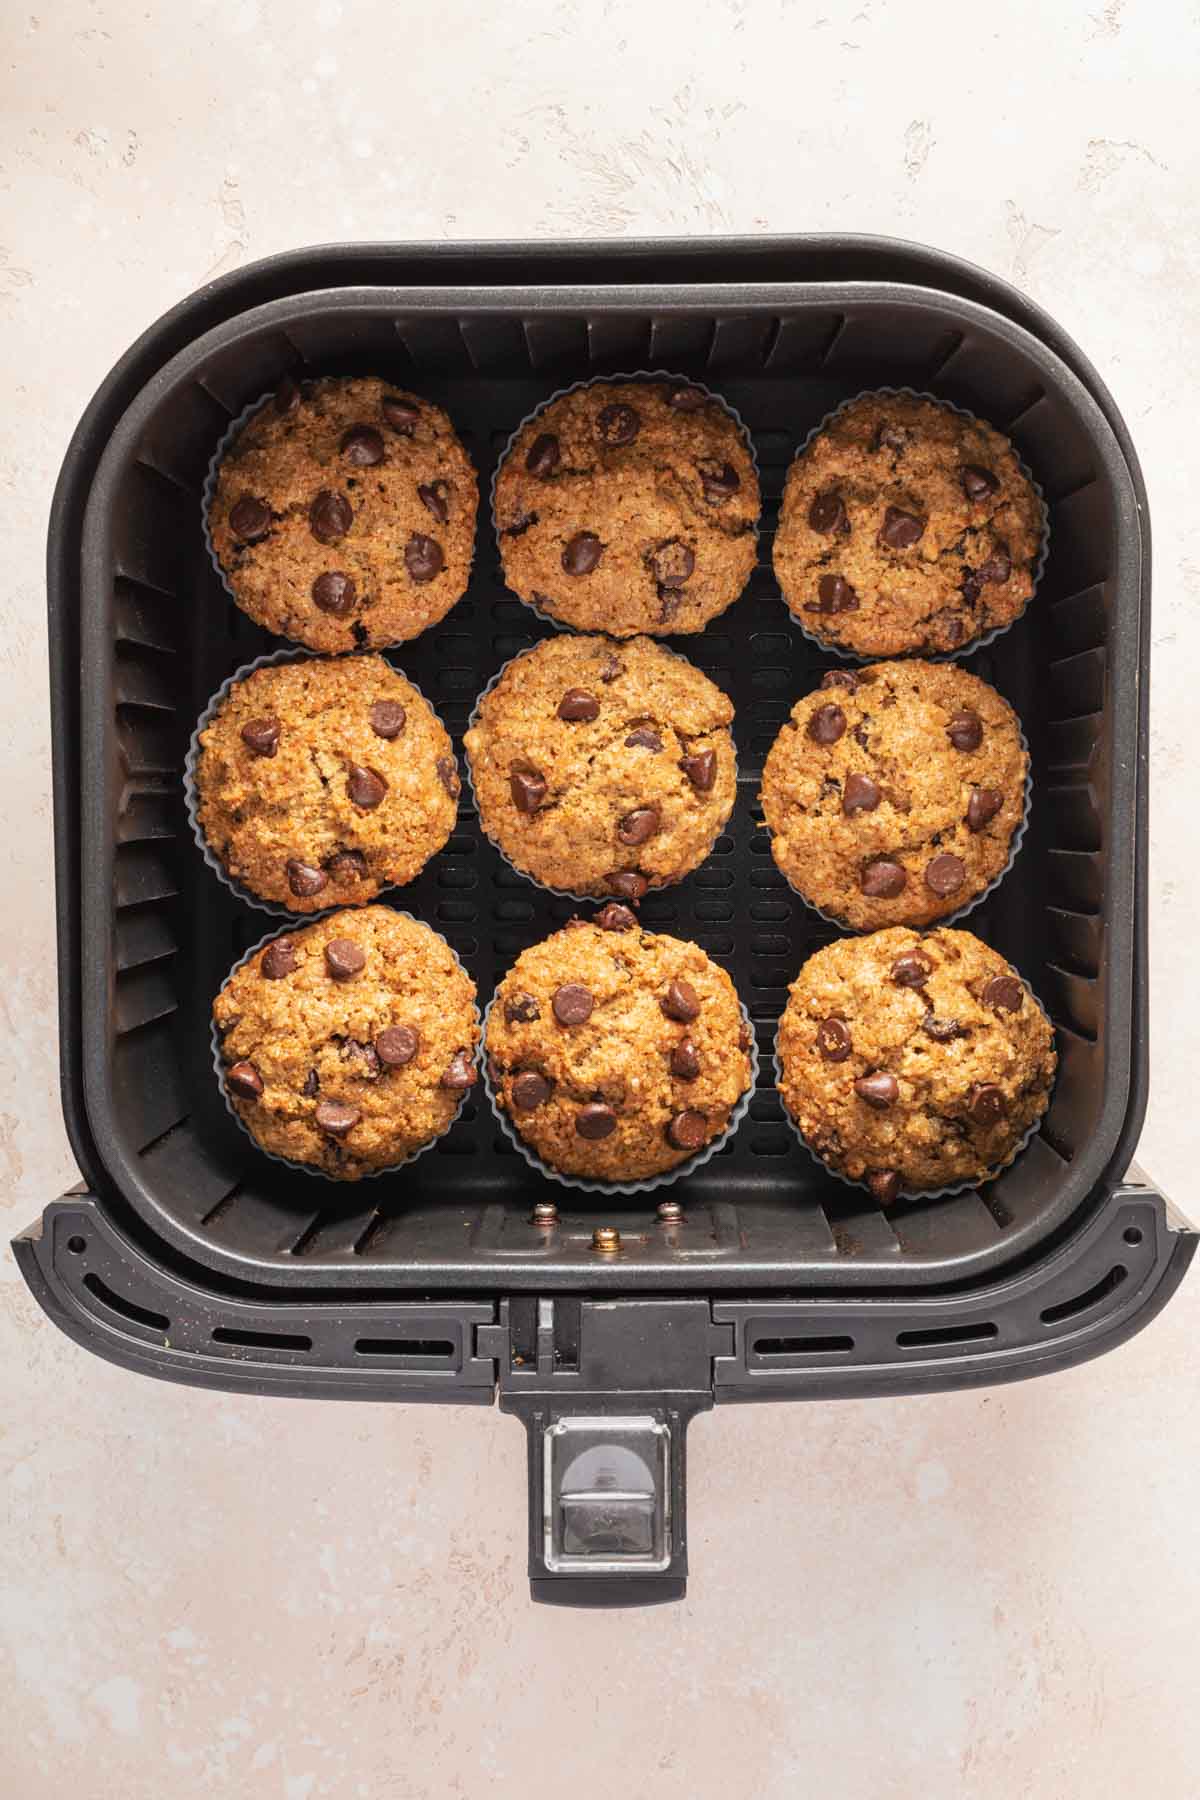 Baked chocolate chip muffins in an air fryer basket.